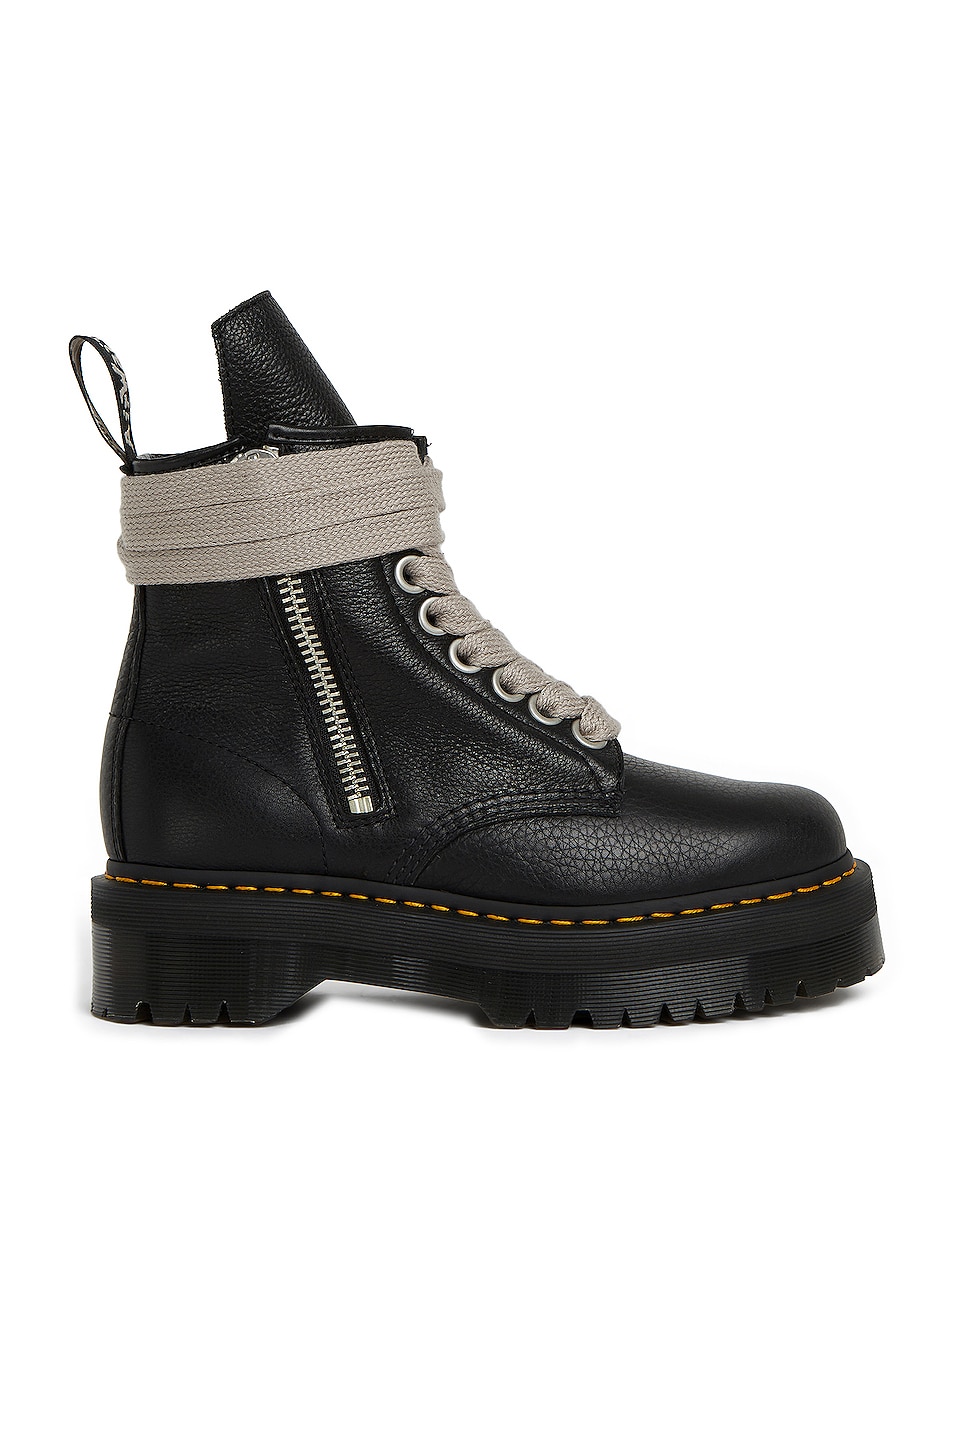 Image 1 of Rick Owens X Dr Martens Quad Sole Jumbo Lace Boot in Black